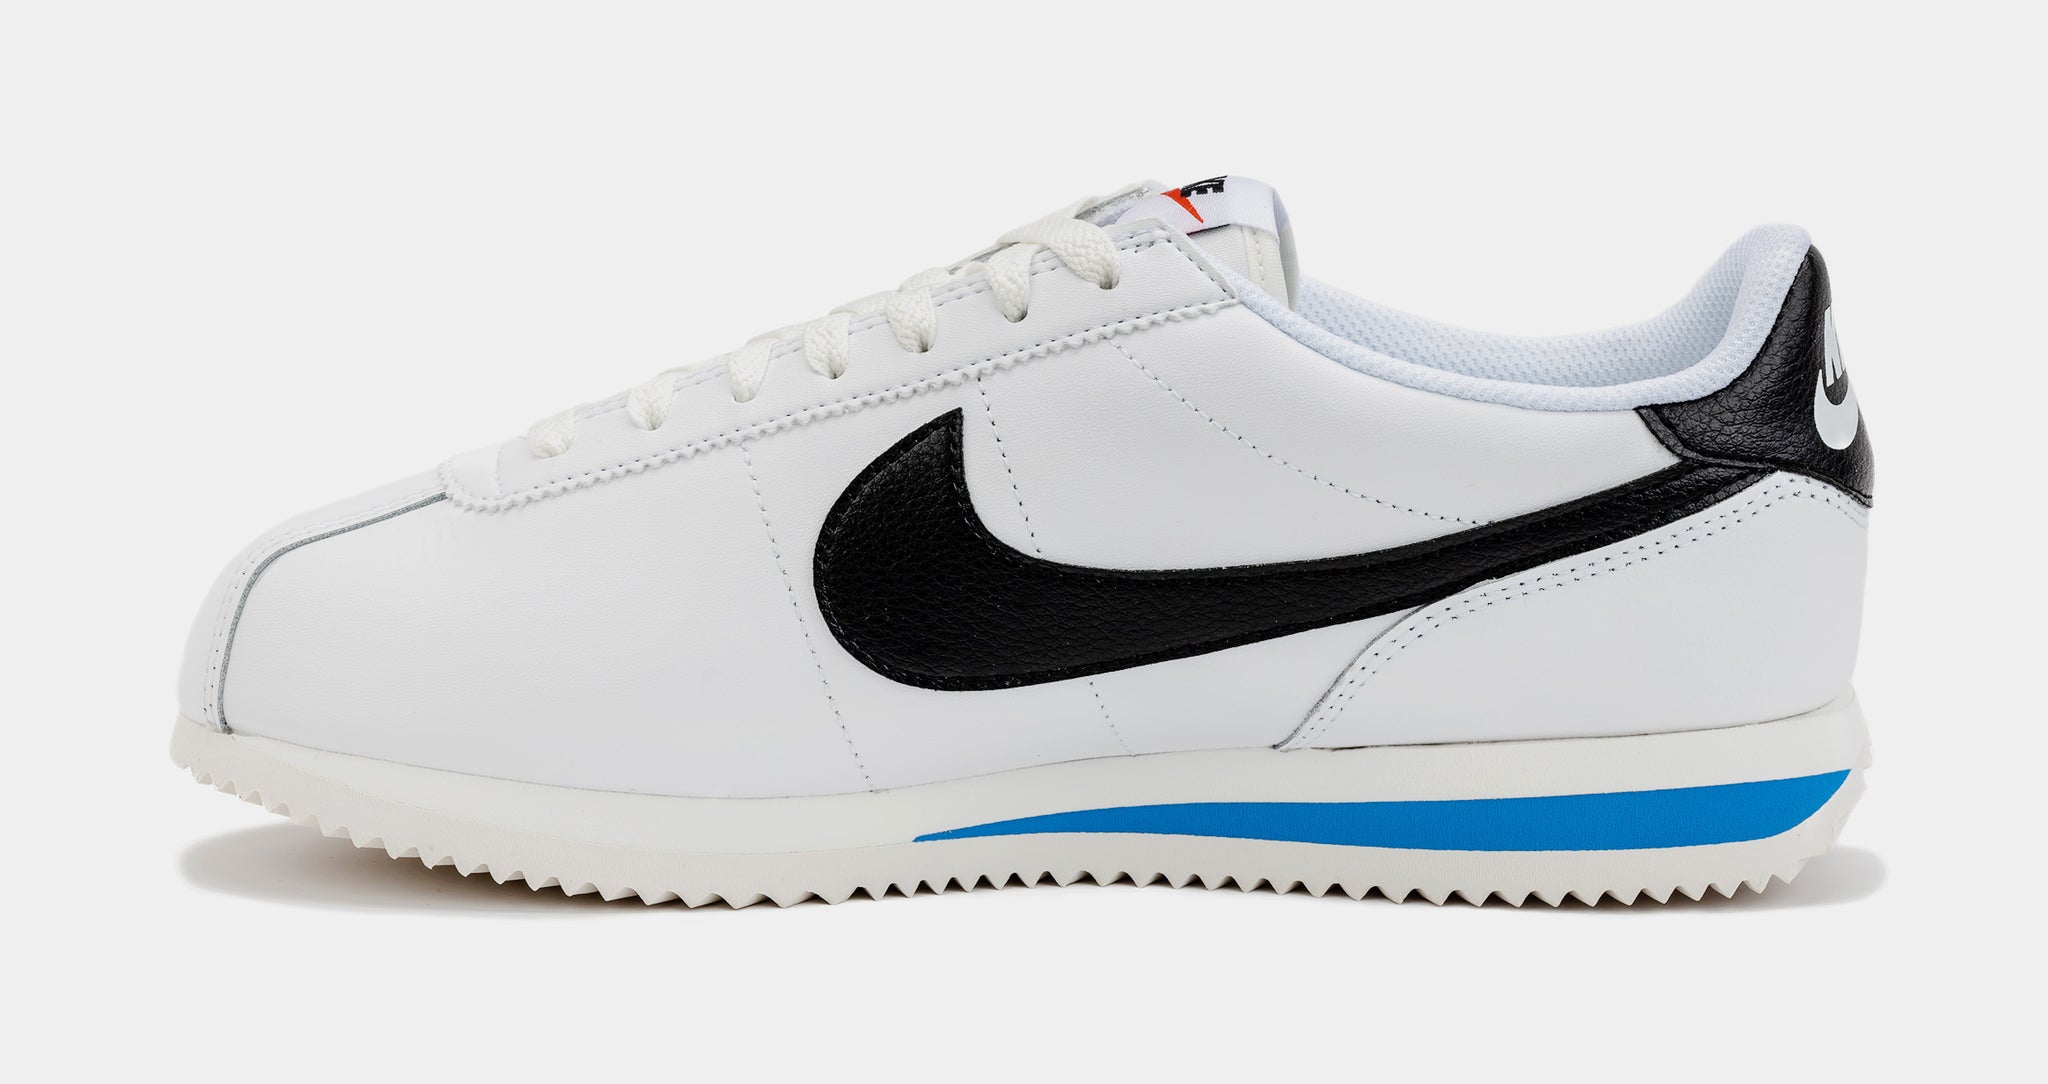 Nike Women's Classic Cortez Leather Casual Shoes, White, 9